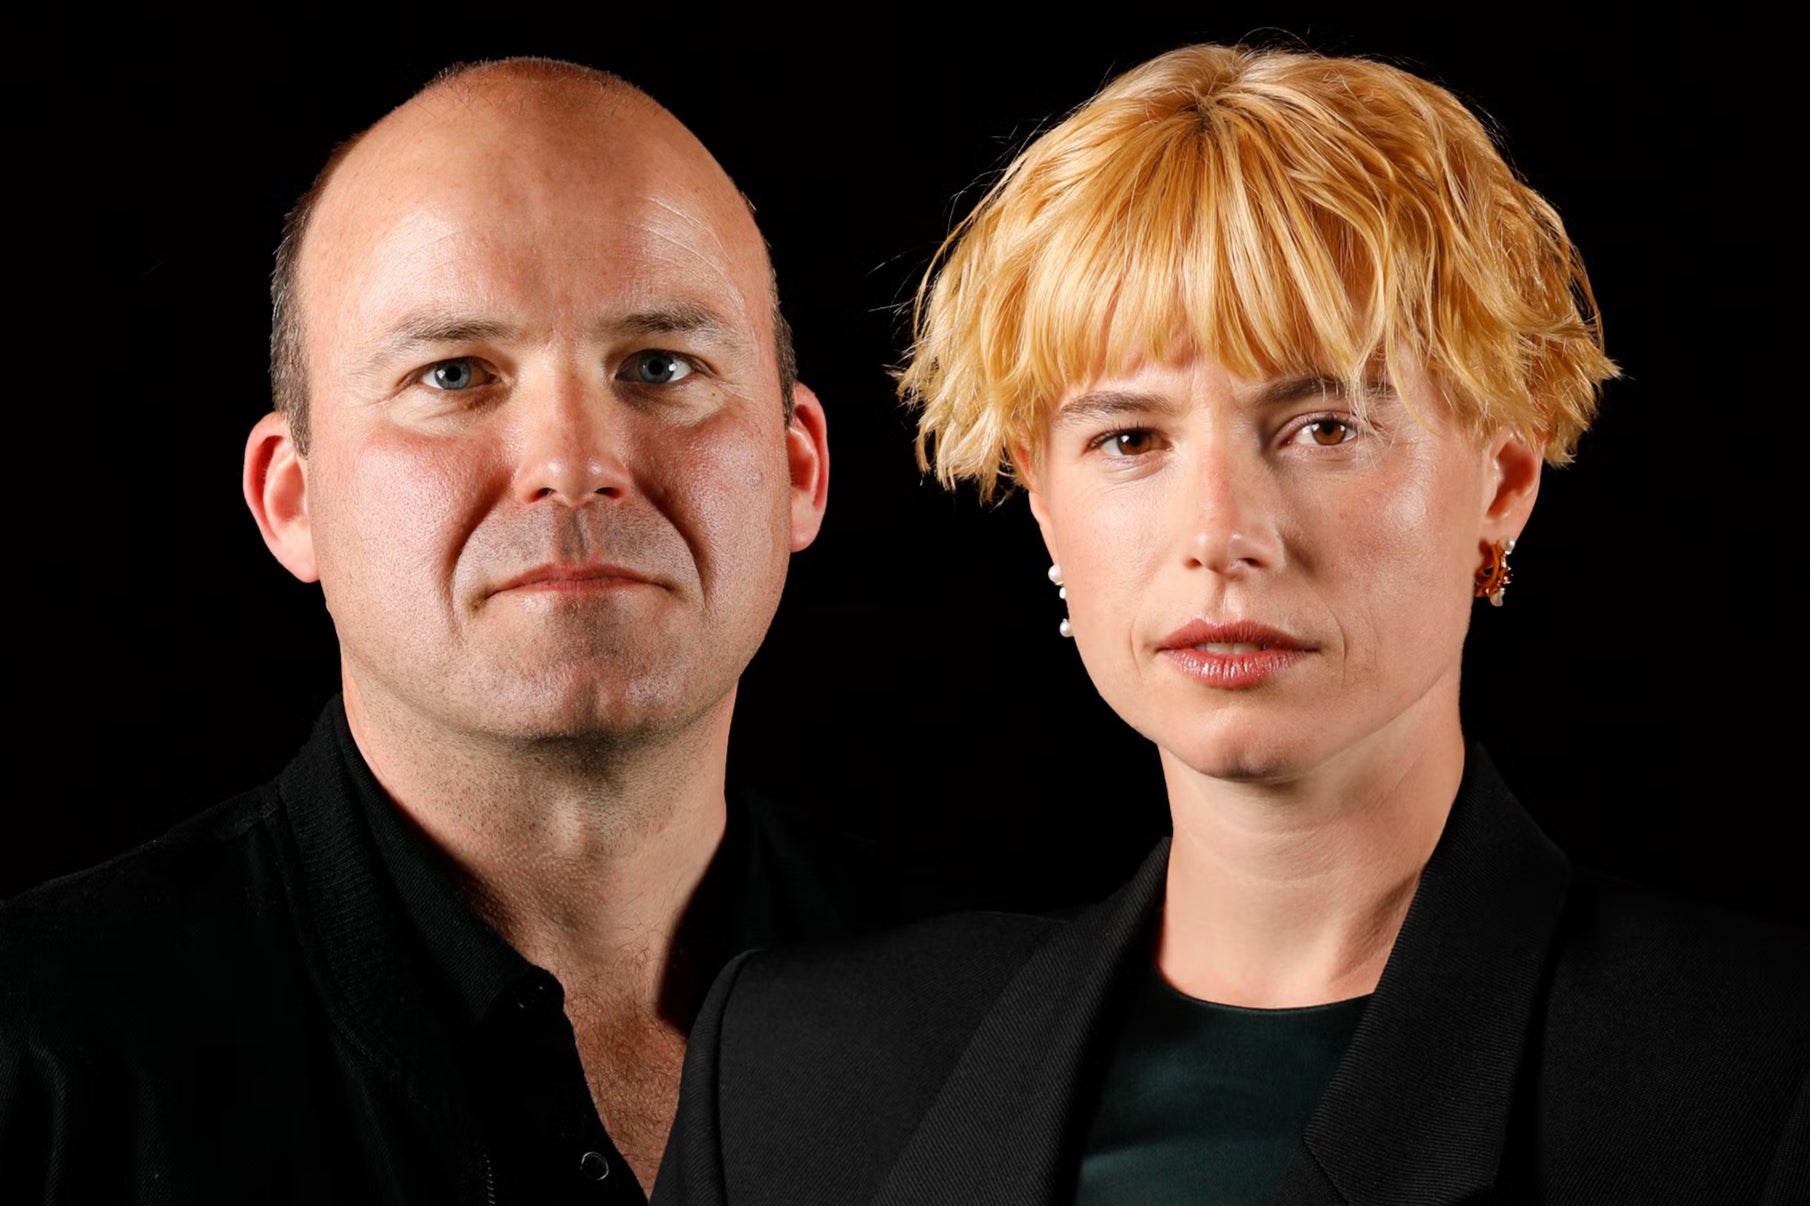 ‘We had no illusions that we were making the next Billy Elliot’: ‘Men’ stars Rory Kinnear and Jessie Buckley